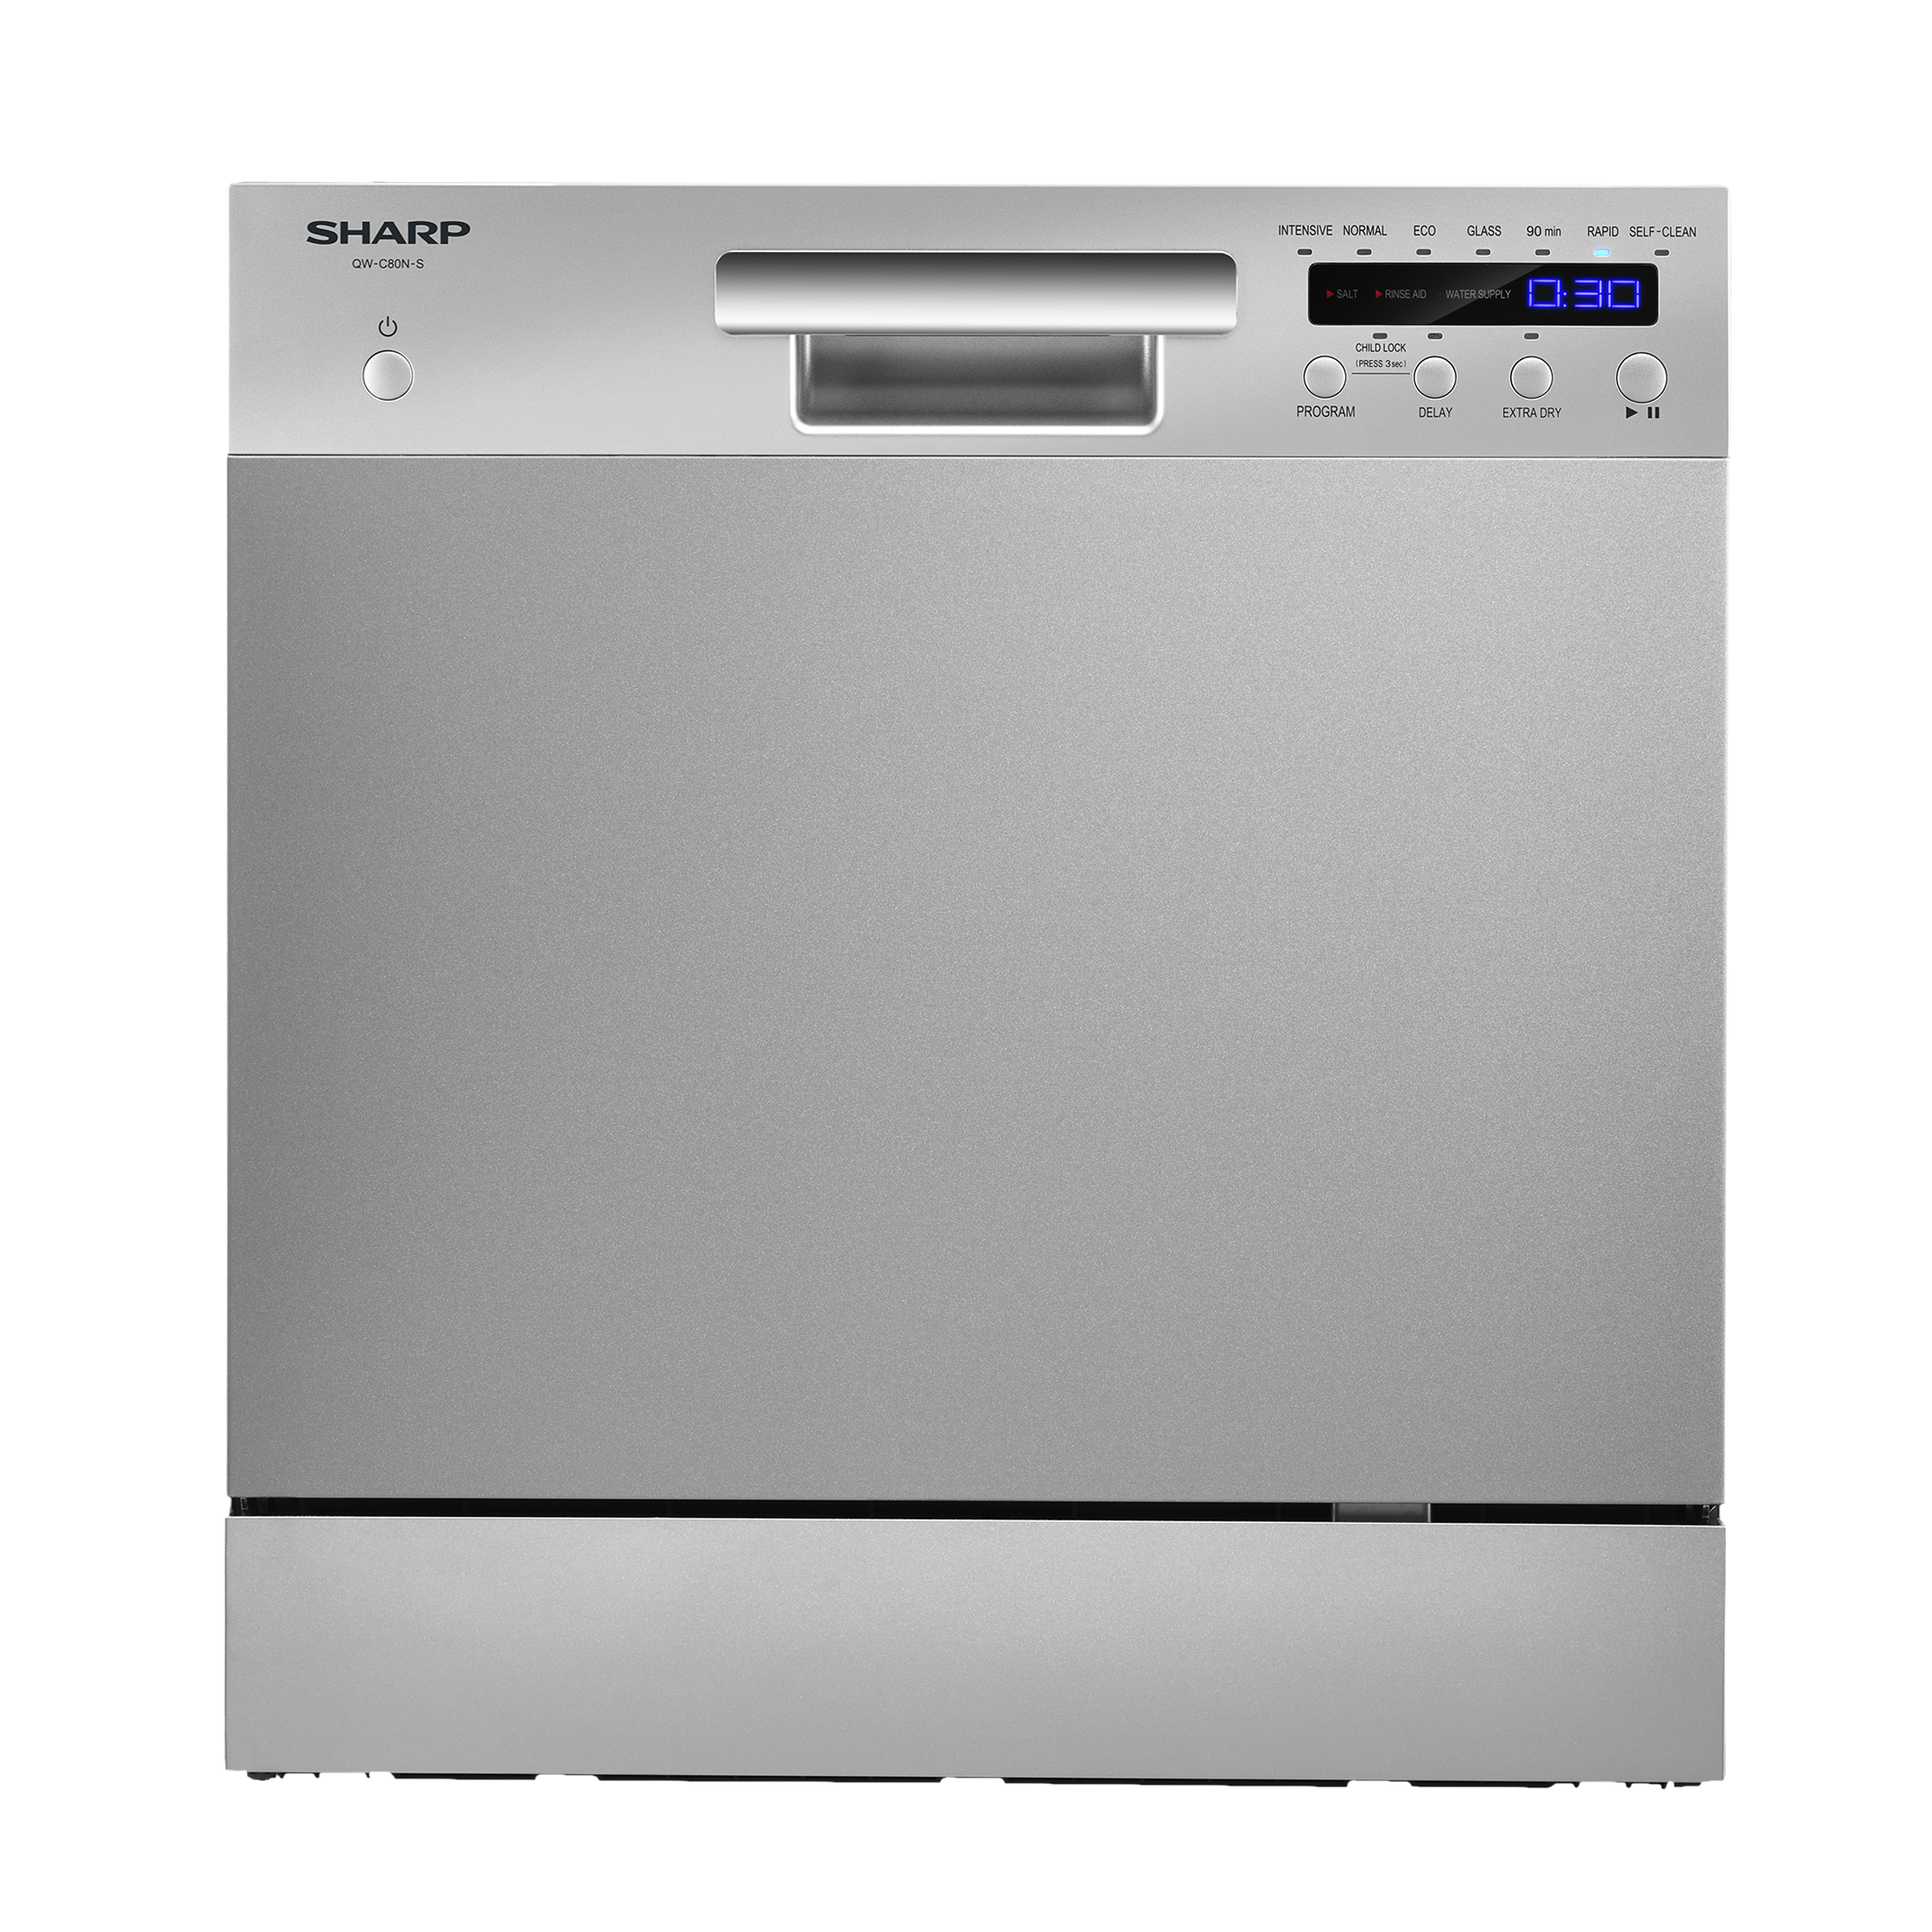 SHARP 8 Place Setting Counter Top Dishwasher (Delay Function, QW-C80N-S, White)_1